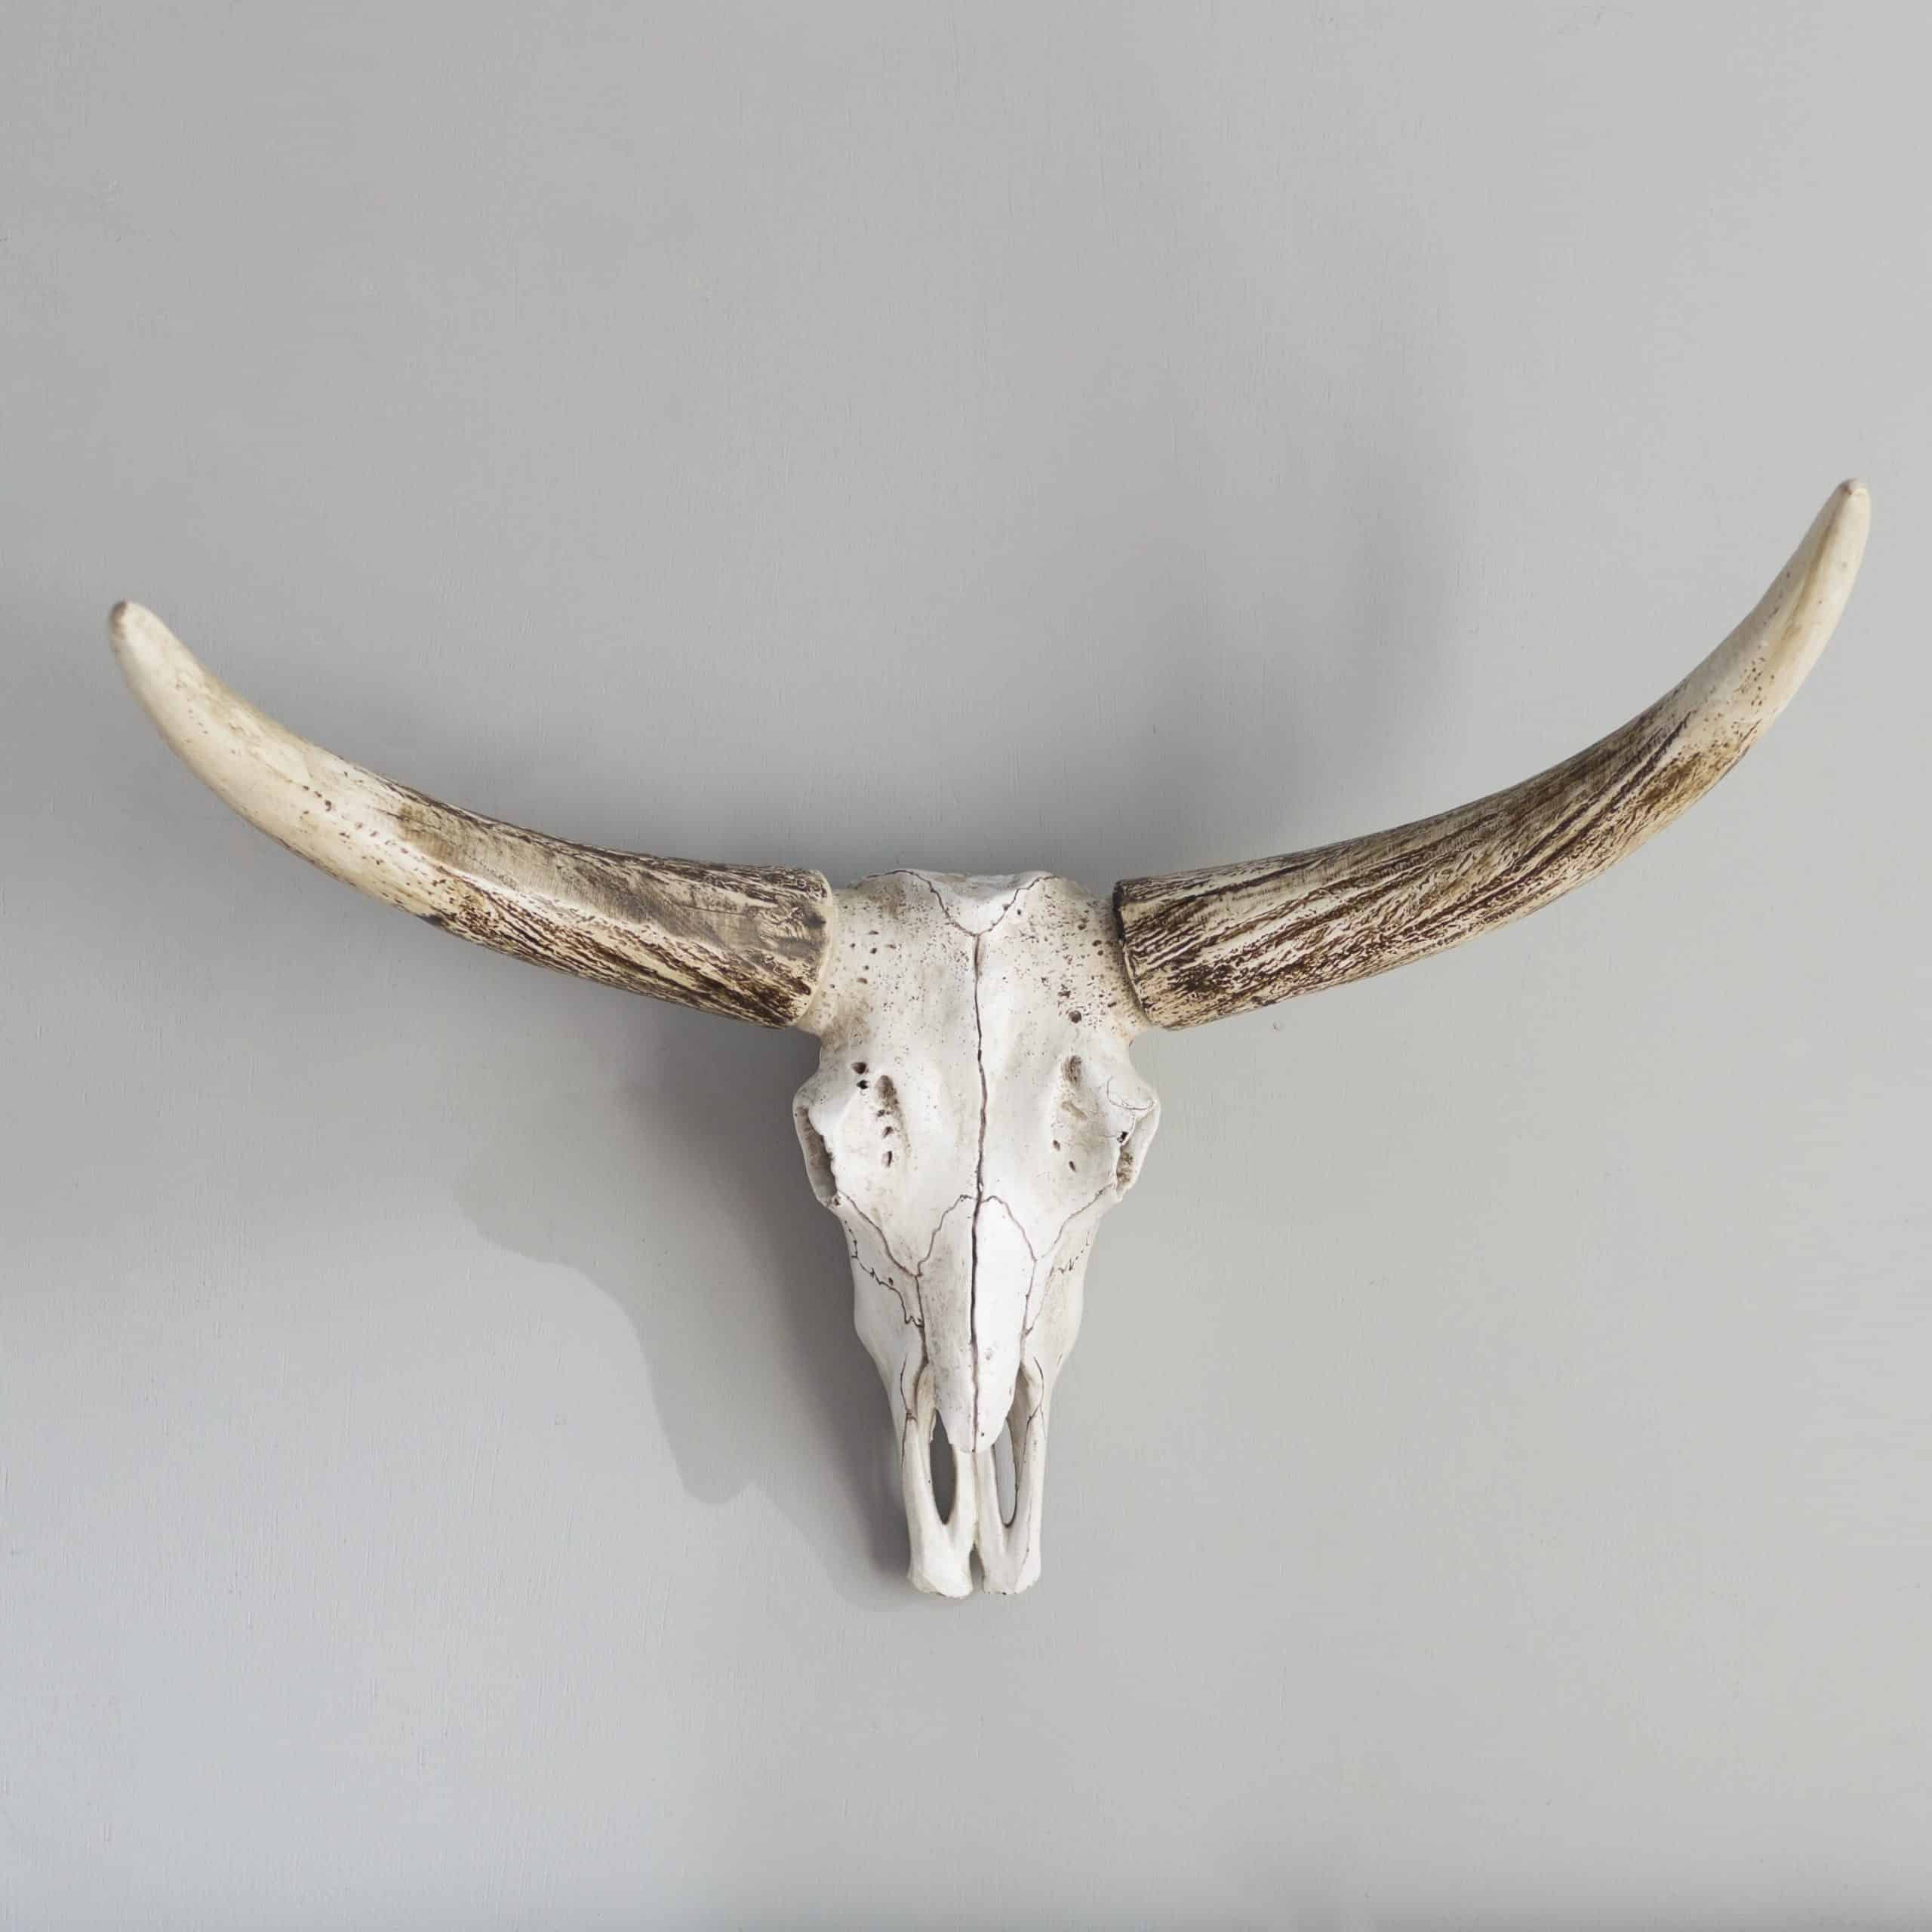 A Longhorn Skull Brings Unexpected Freshness to a Kitchen